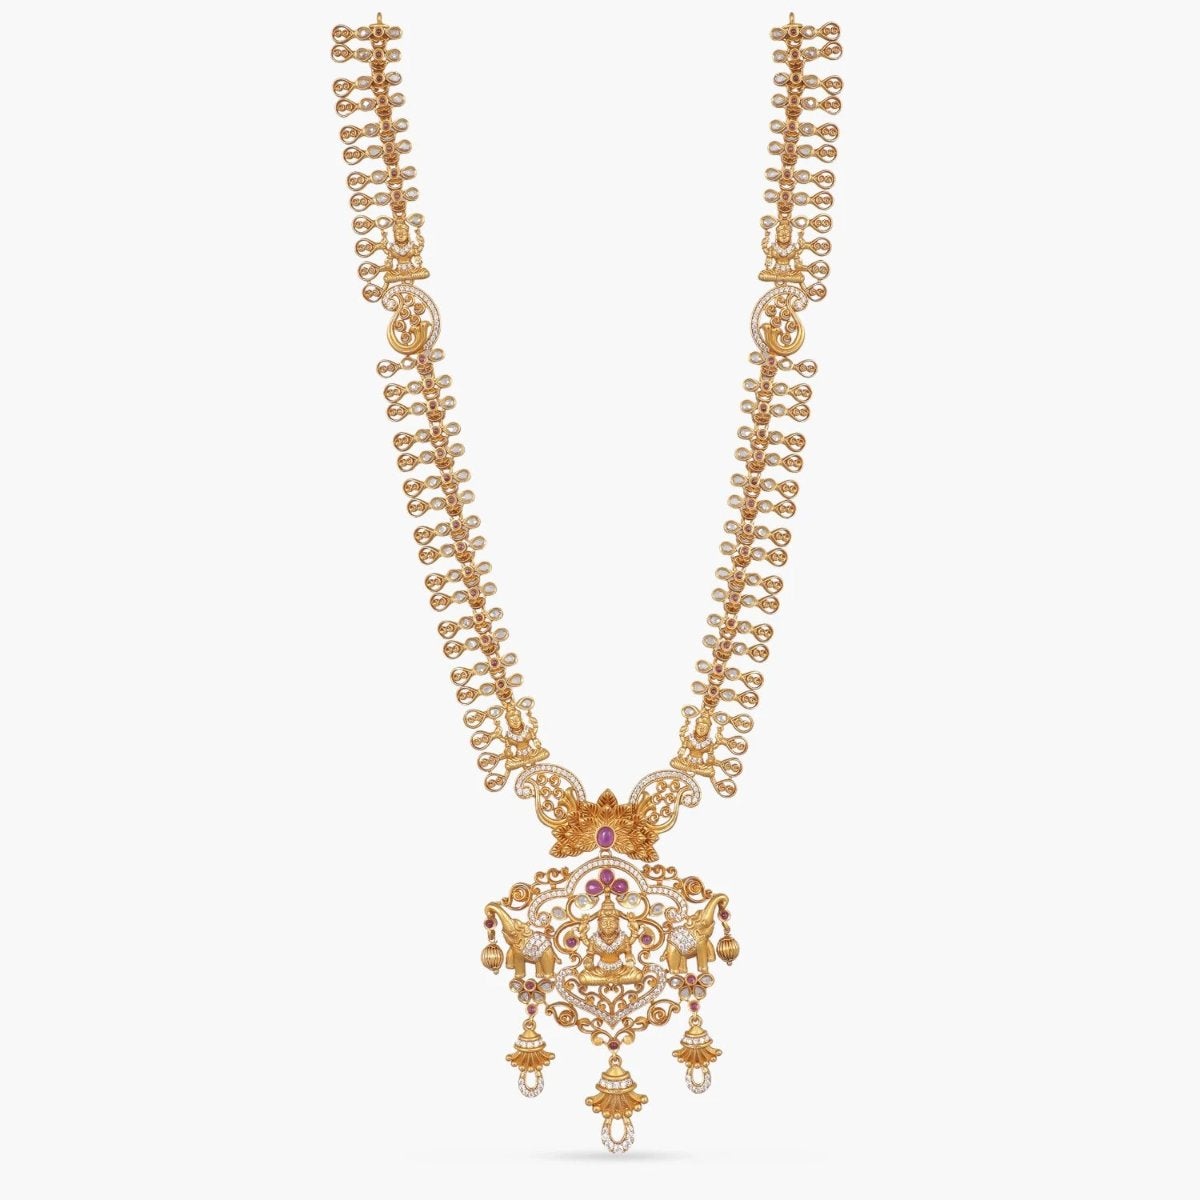 Bhumi Antique Long Necklace